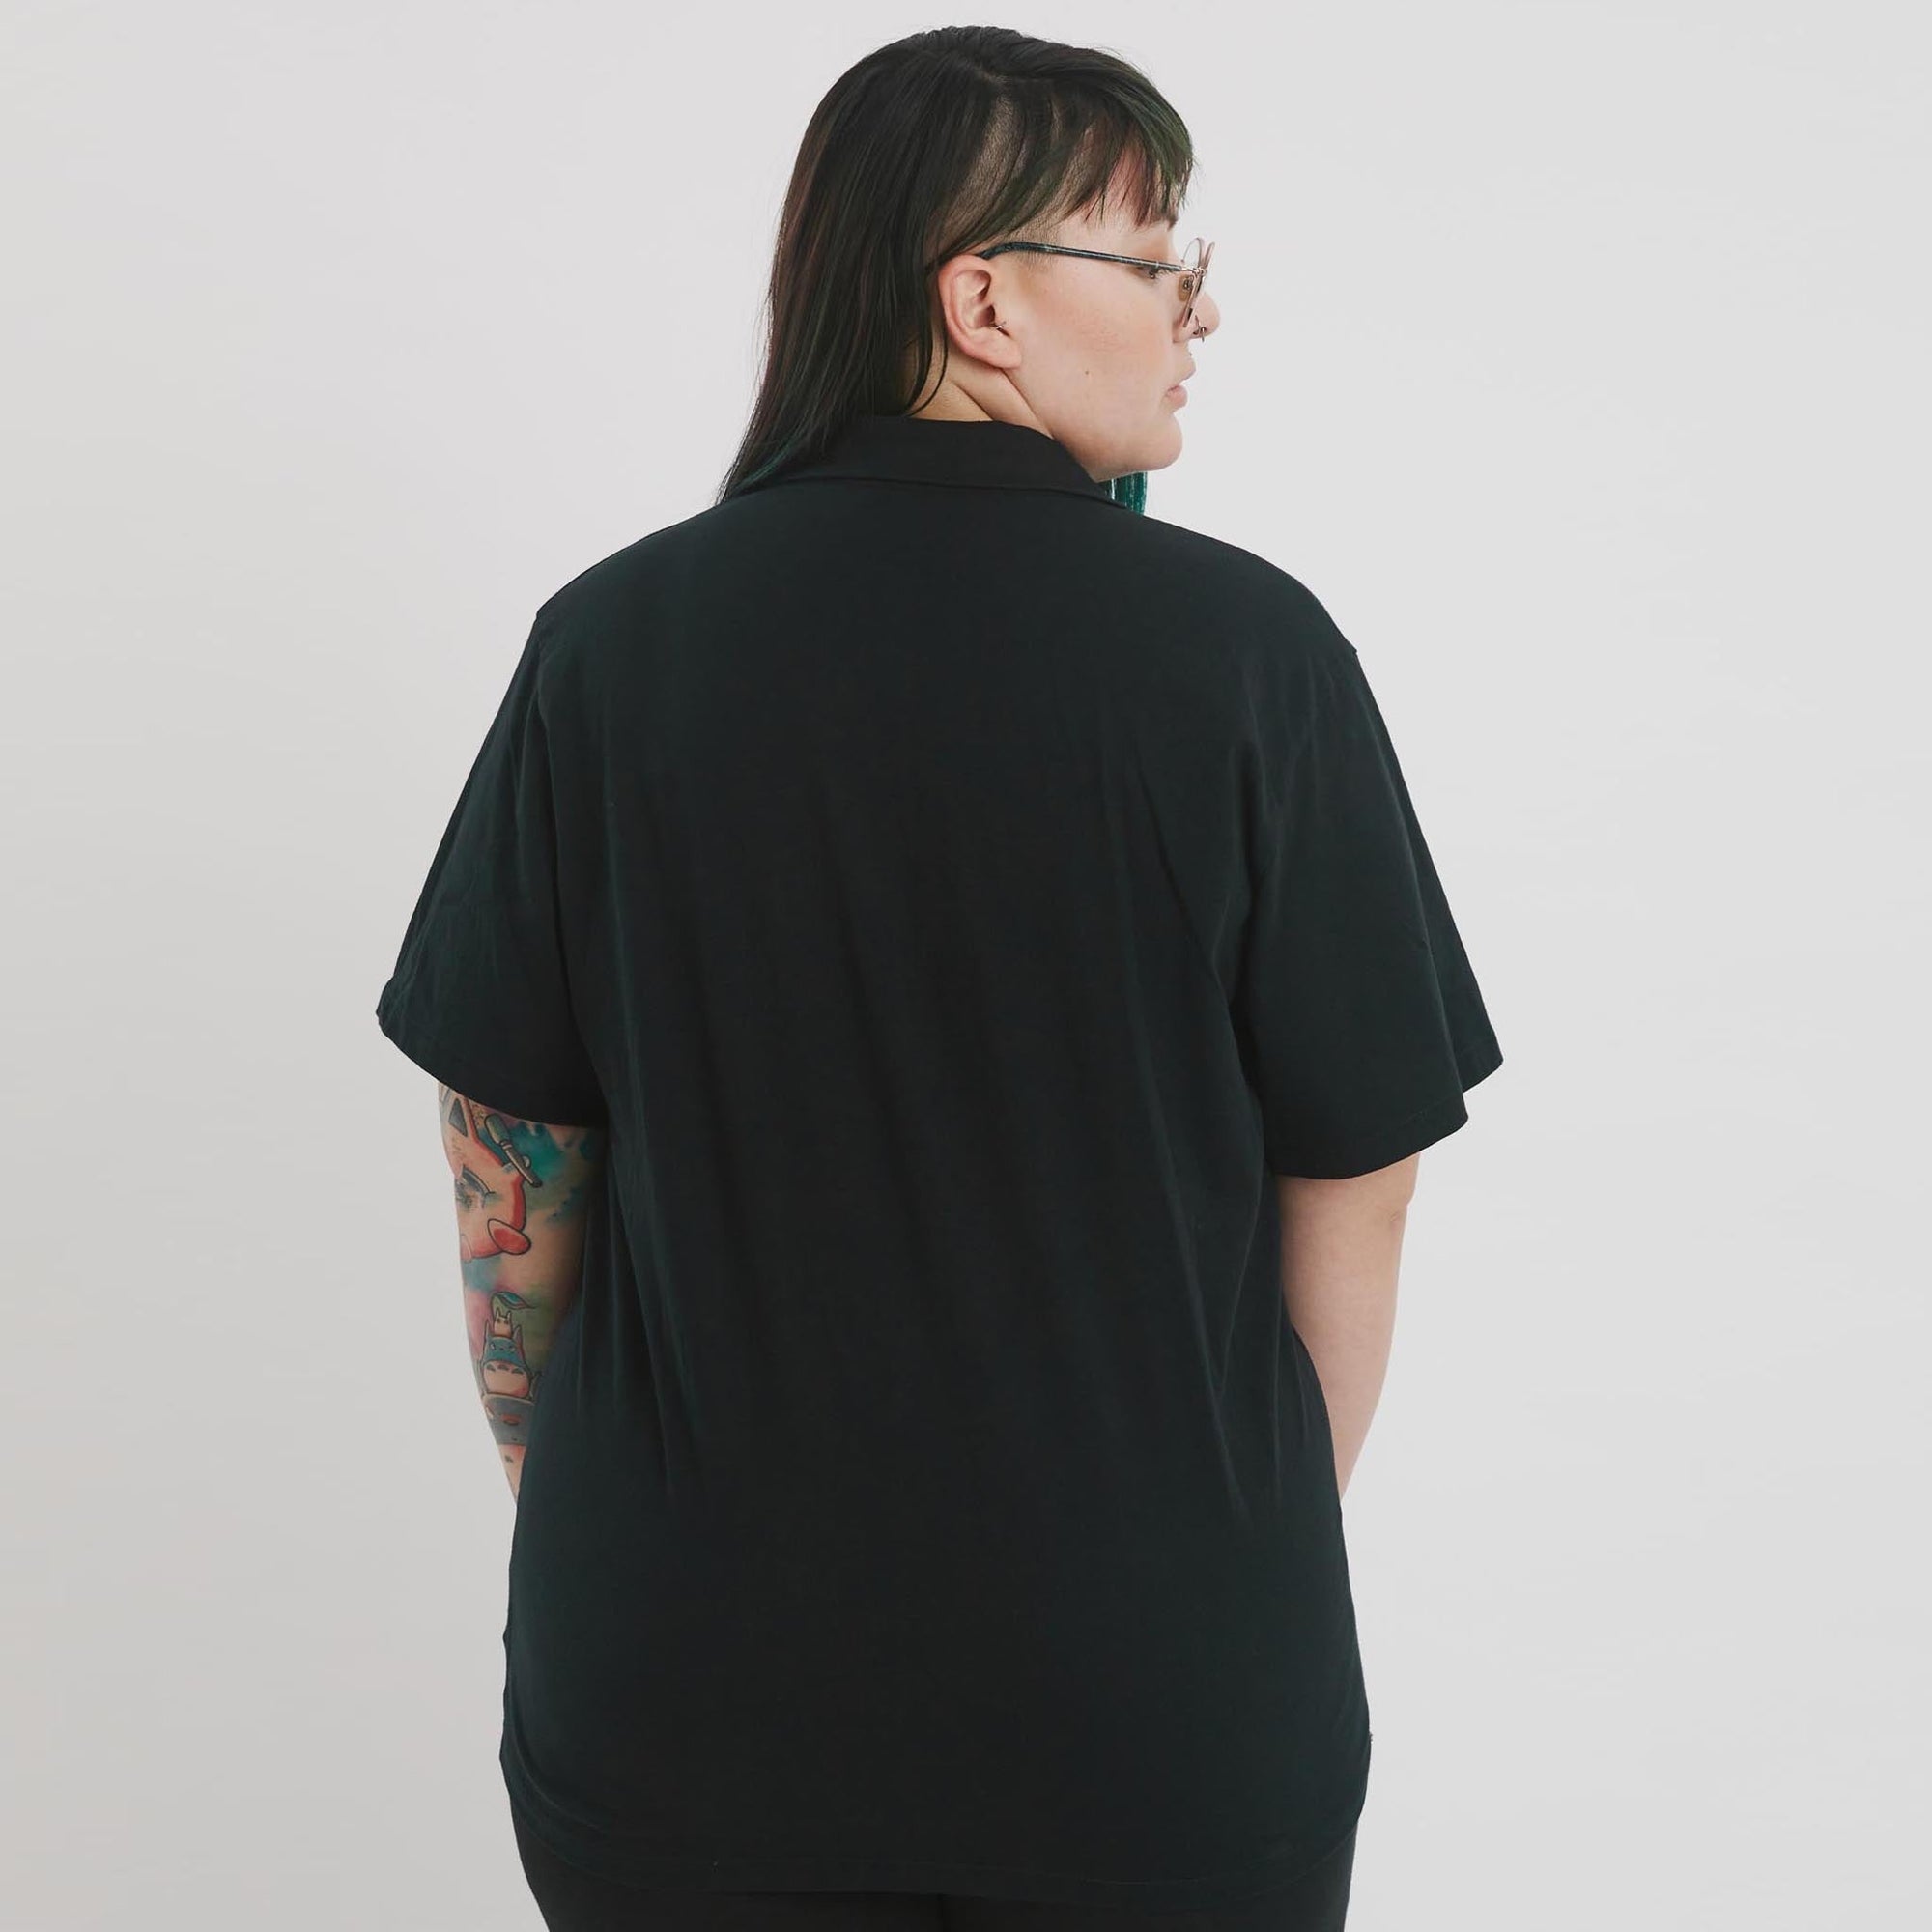 The Comfy Polo Shirt-Womens. No tags, no lables. The Shapes United.